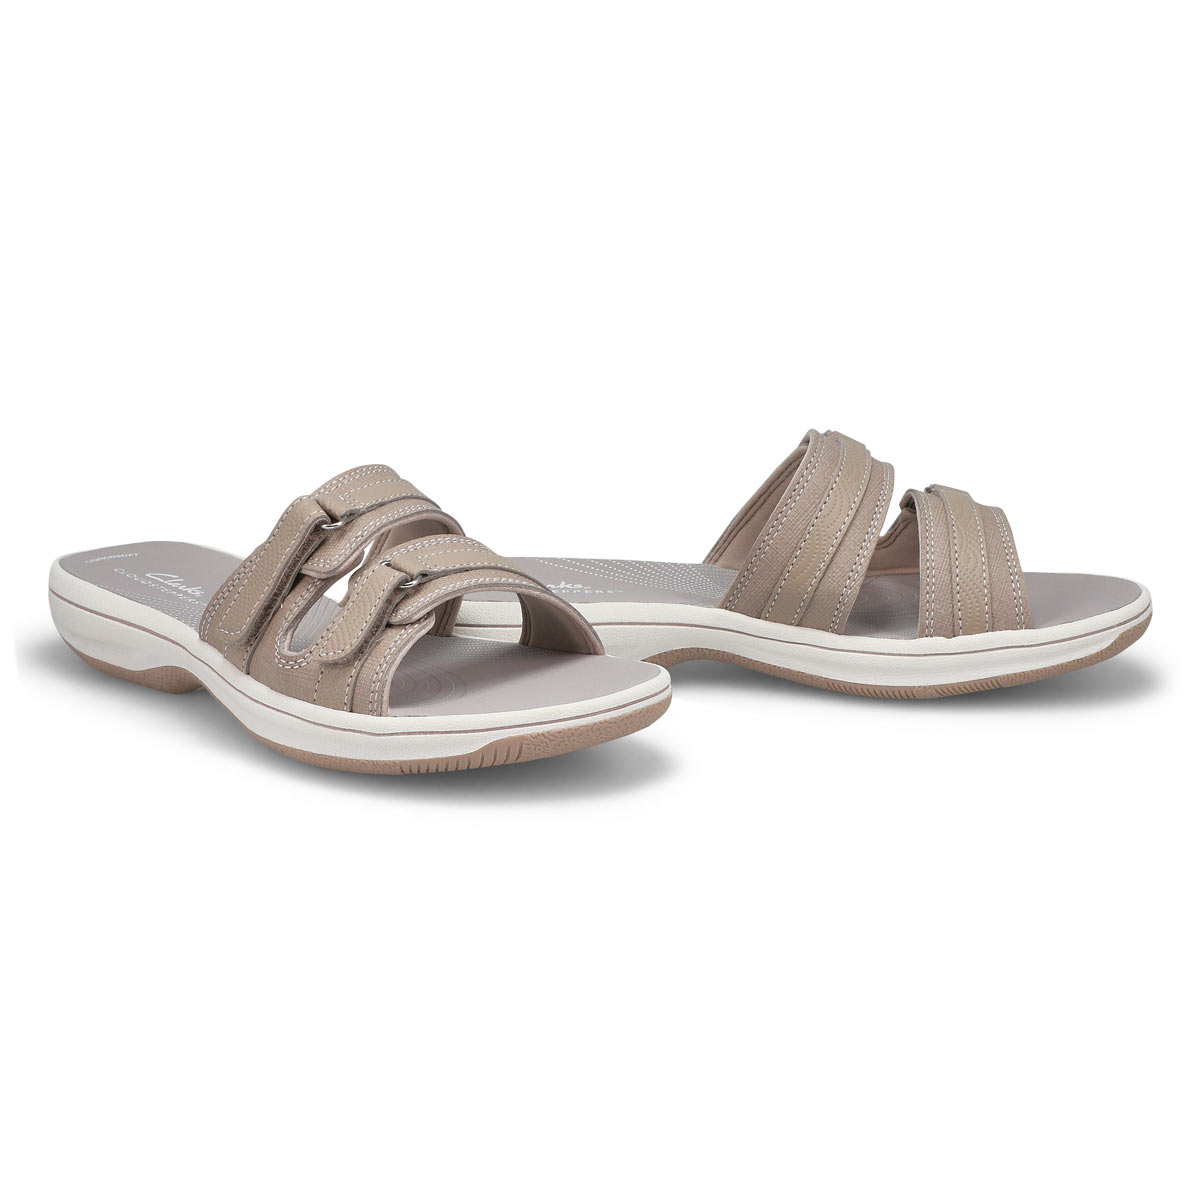 Women's Breeze Piper Casual Sandal - Light Taupe